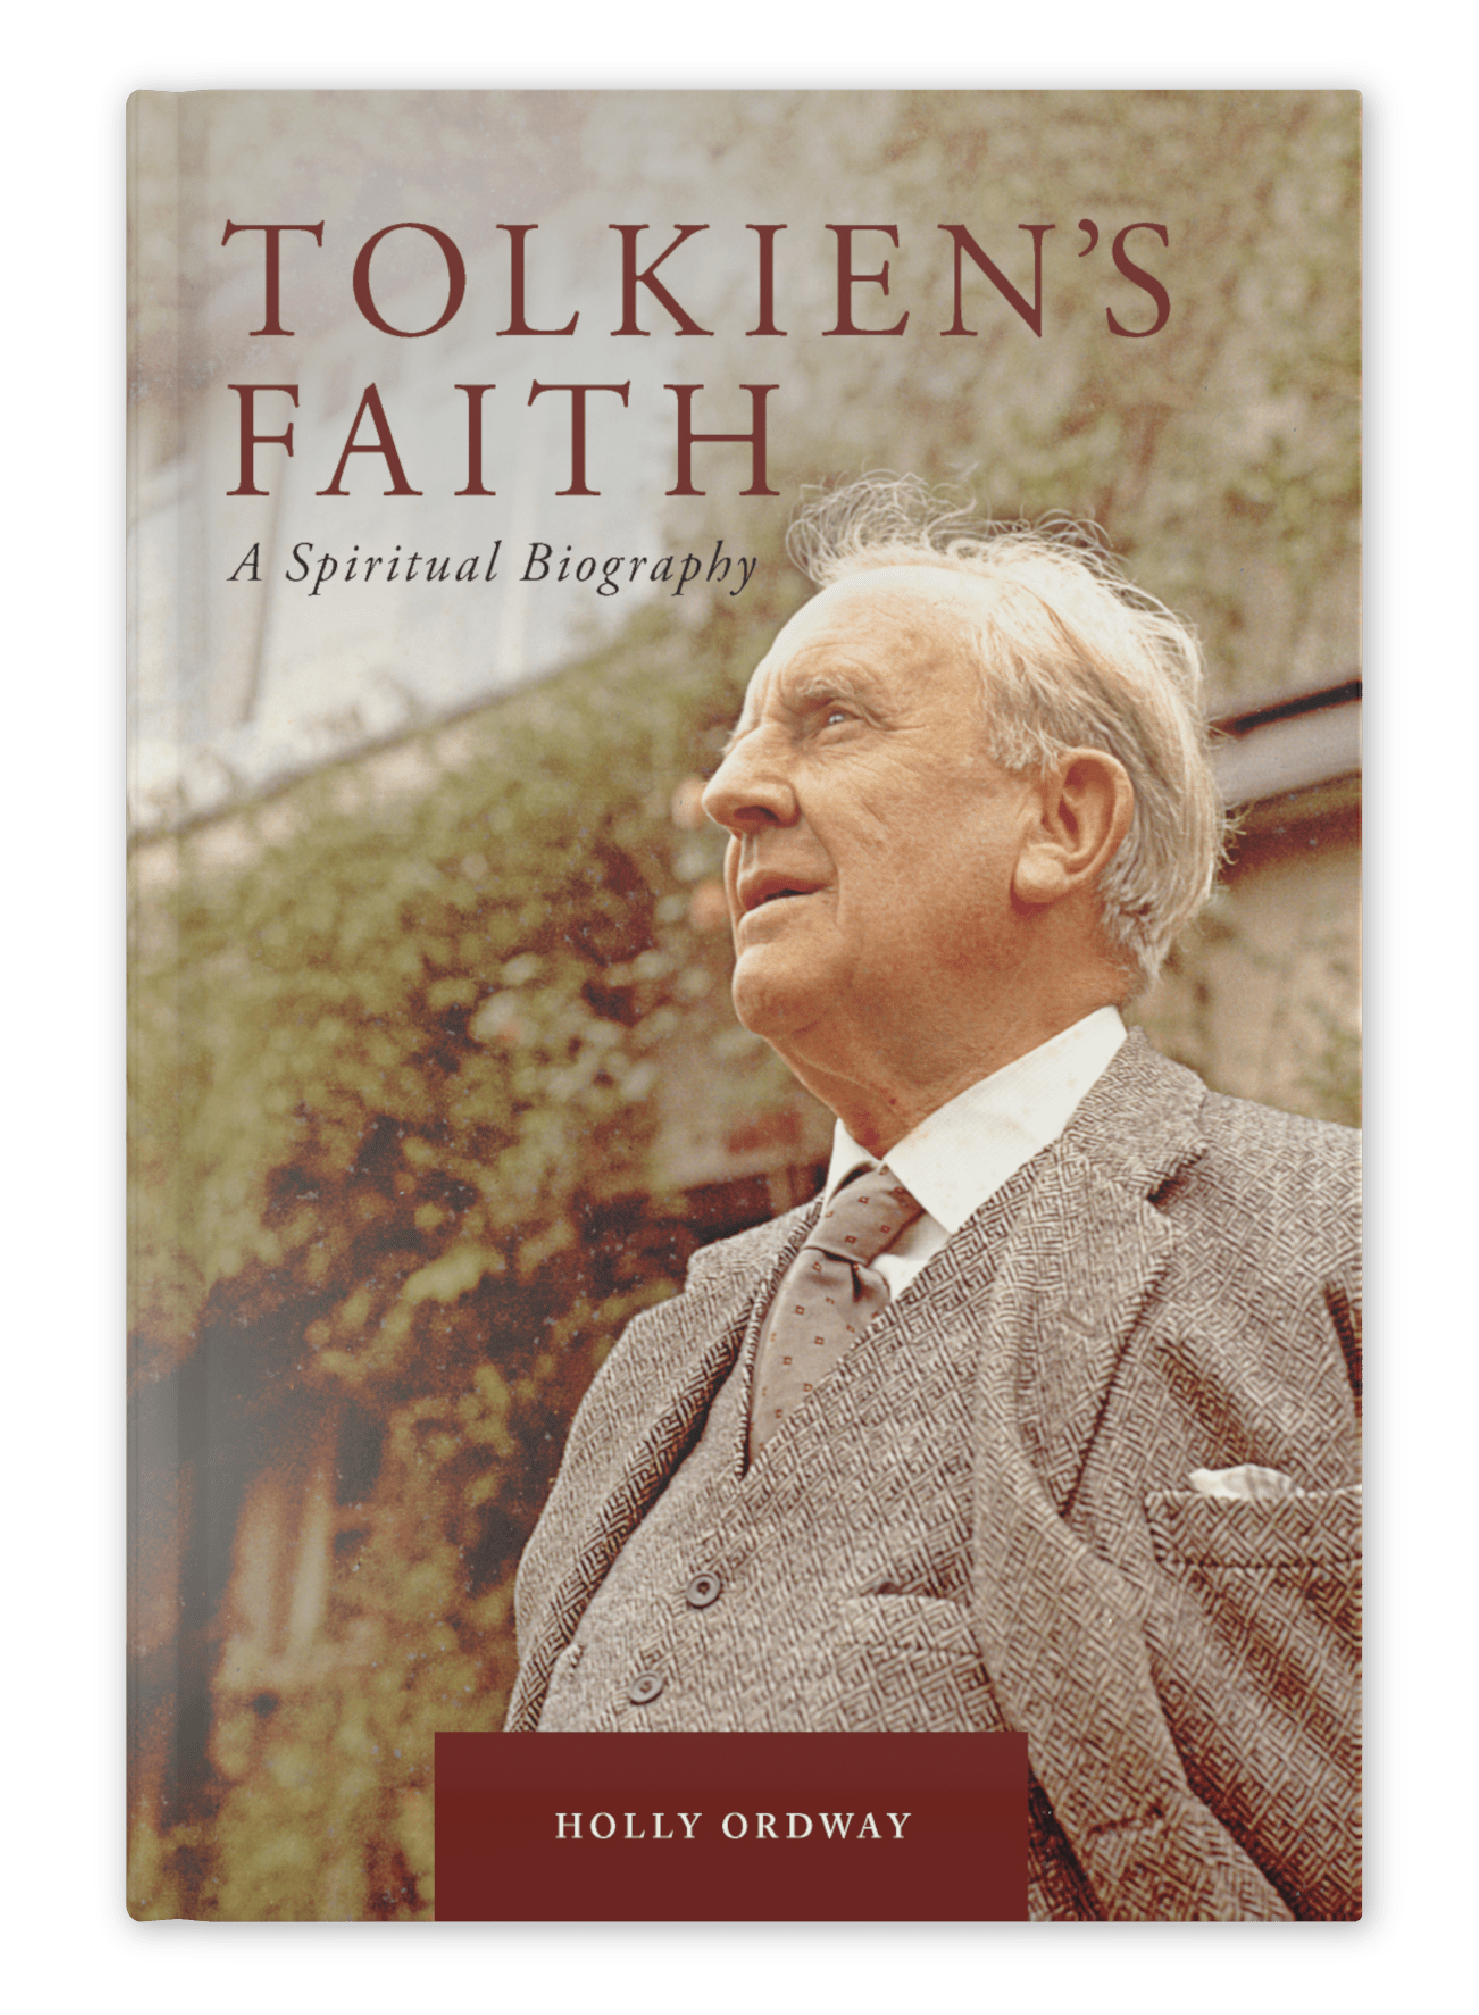 J.R.R. Tolkien: Christian Maker of Middle-Earth